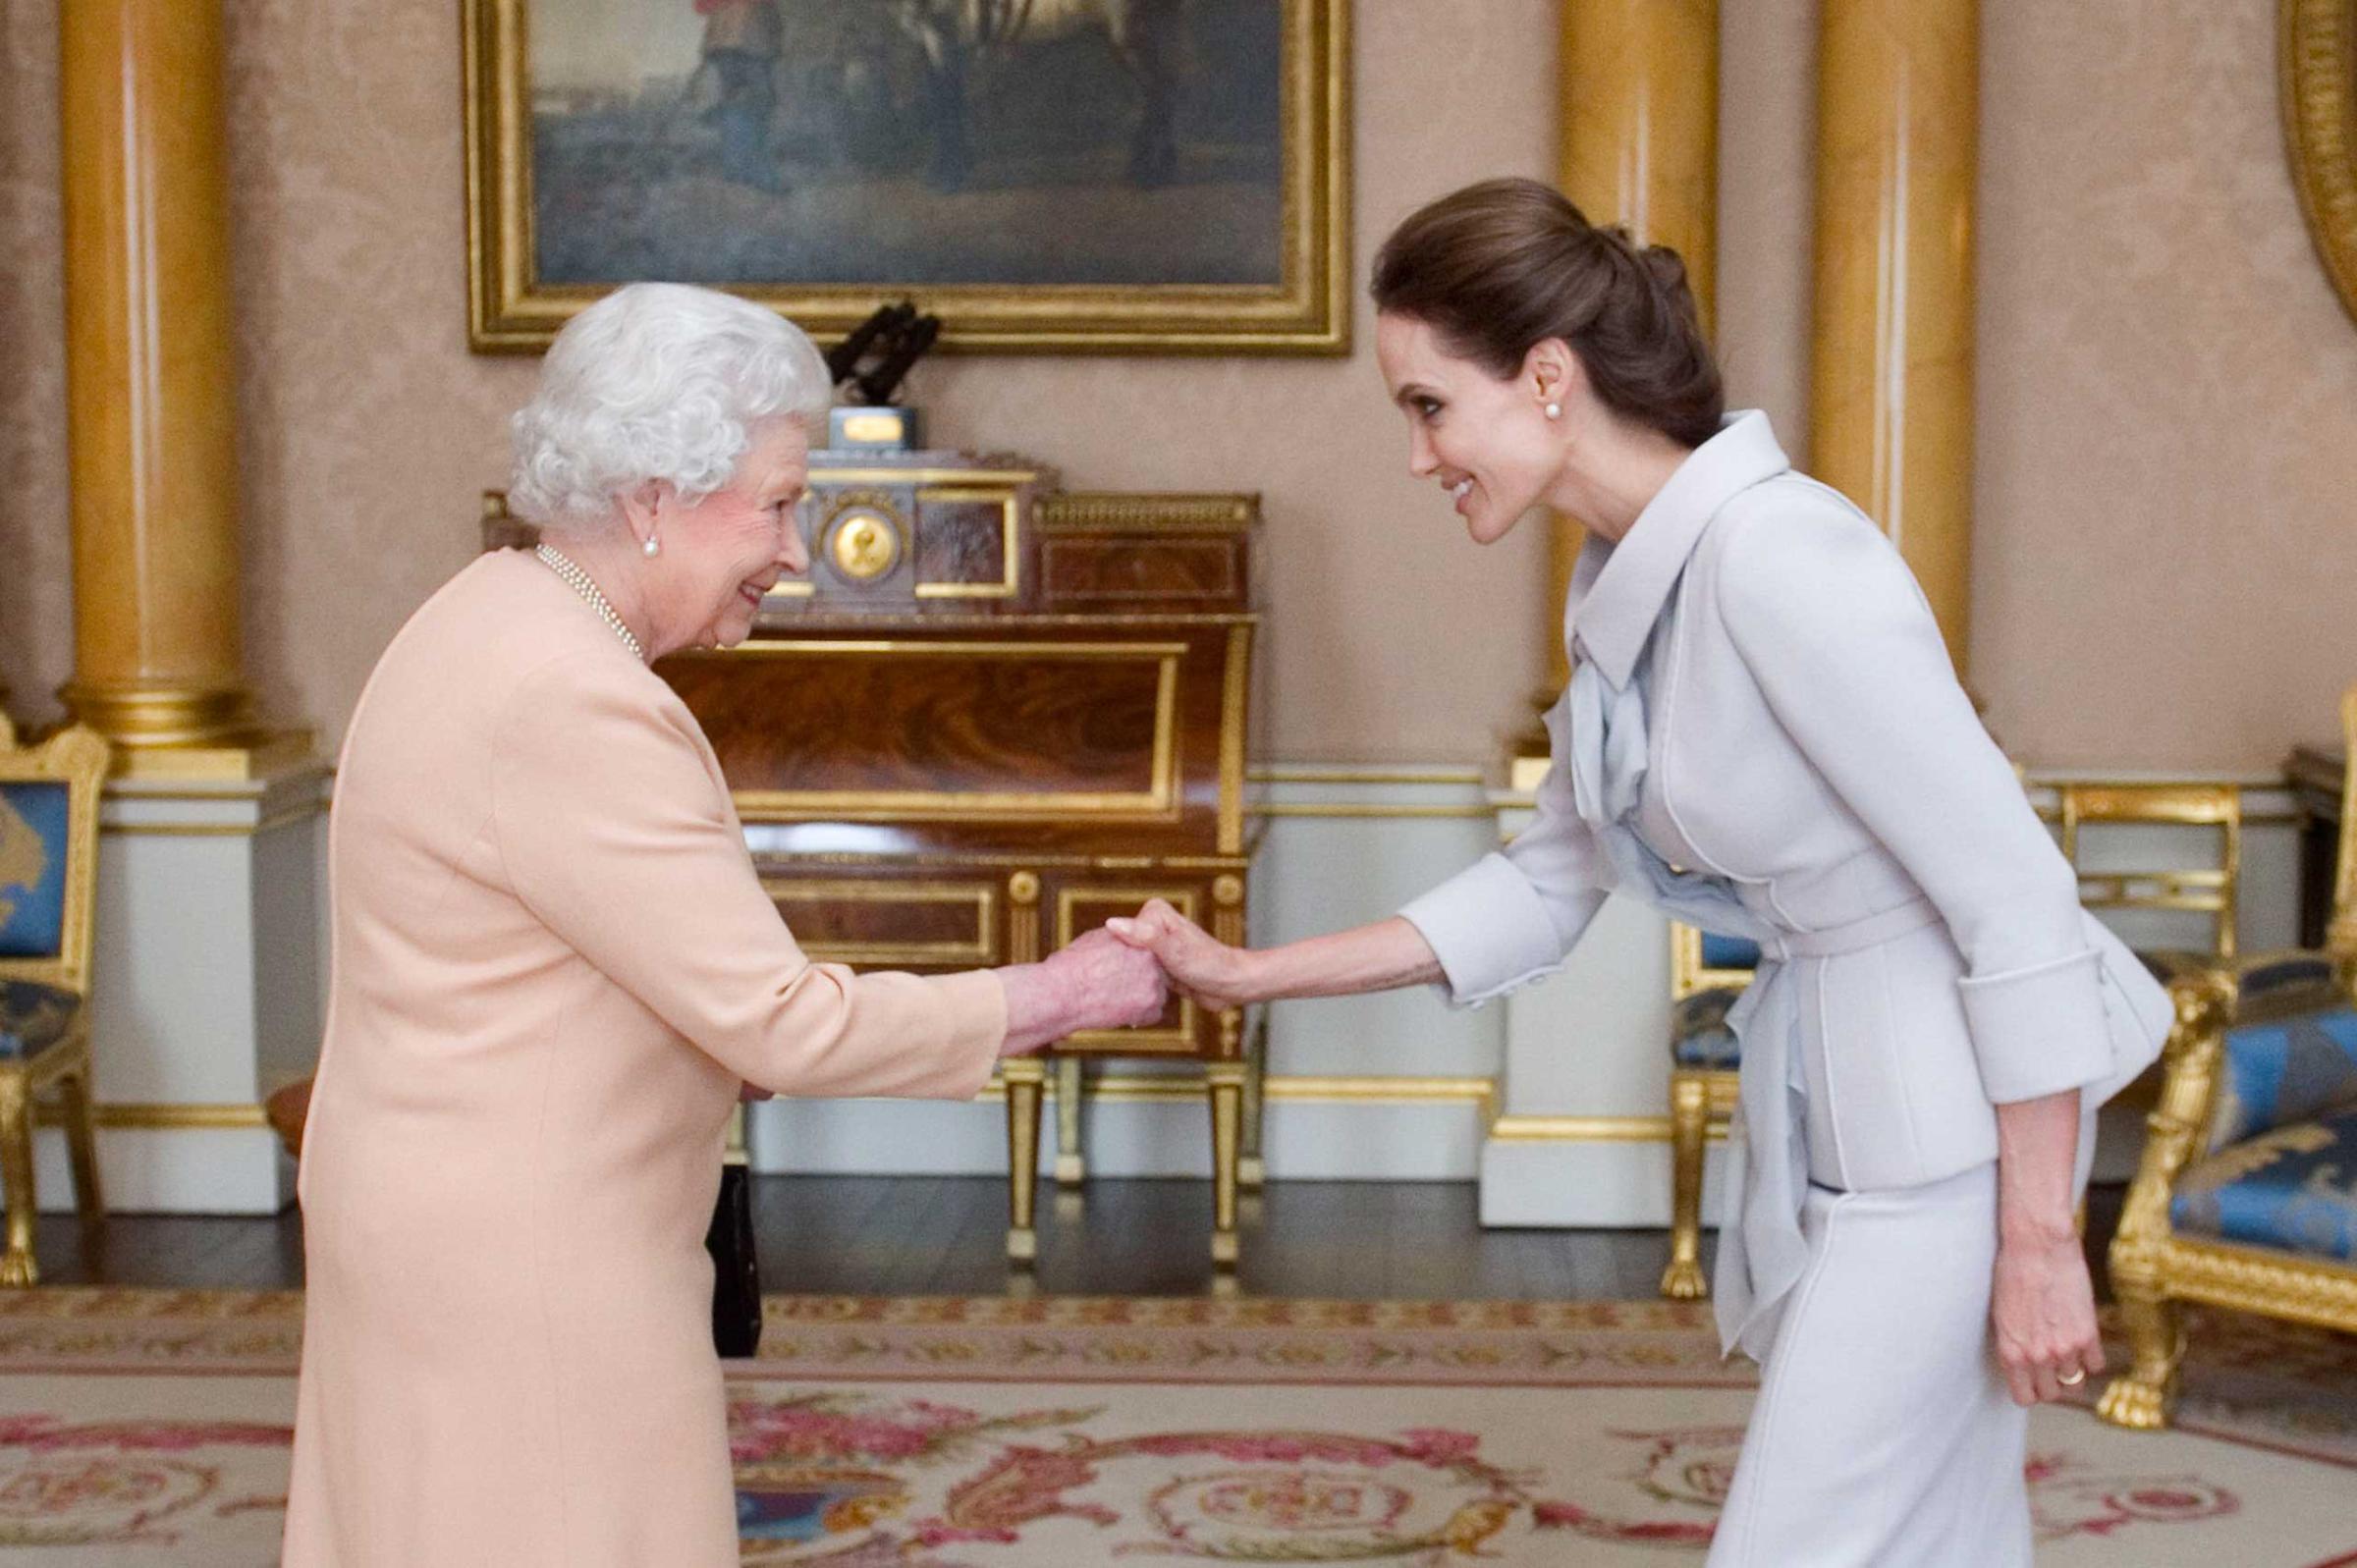 Actress Angelina Jolie, right, is presented with the Insignia of an Honorary Dame Grand Cross of the Most Distinguished Order of St Michael and St George by Britain's Queen Elizabeth II at Buckingham Palace, London, Oct. 10, 2014.